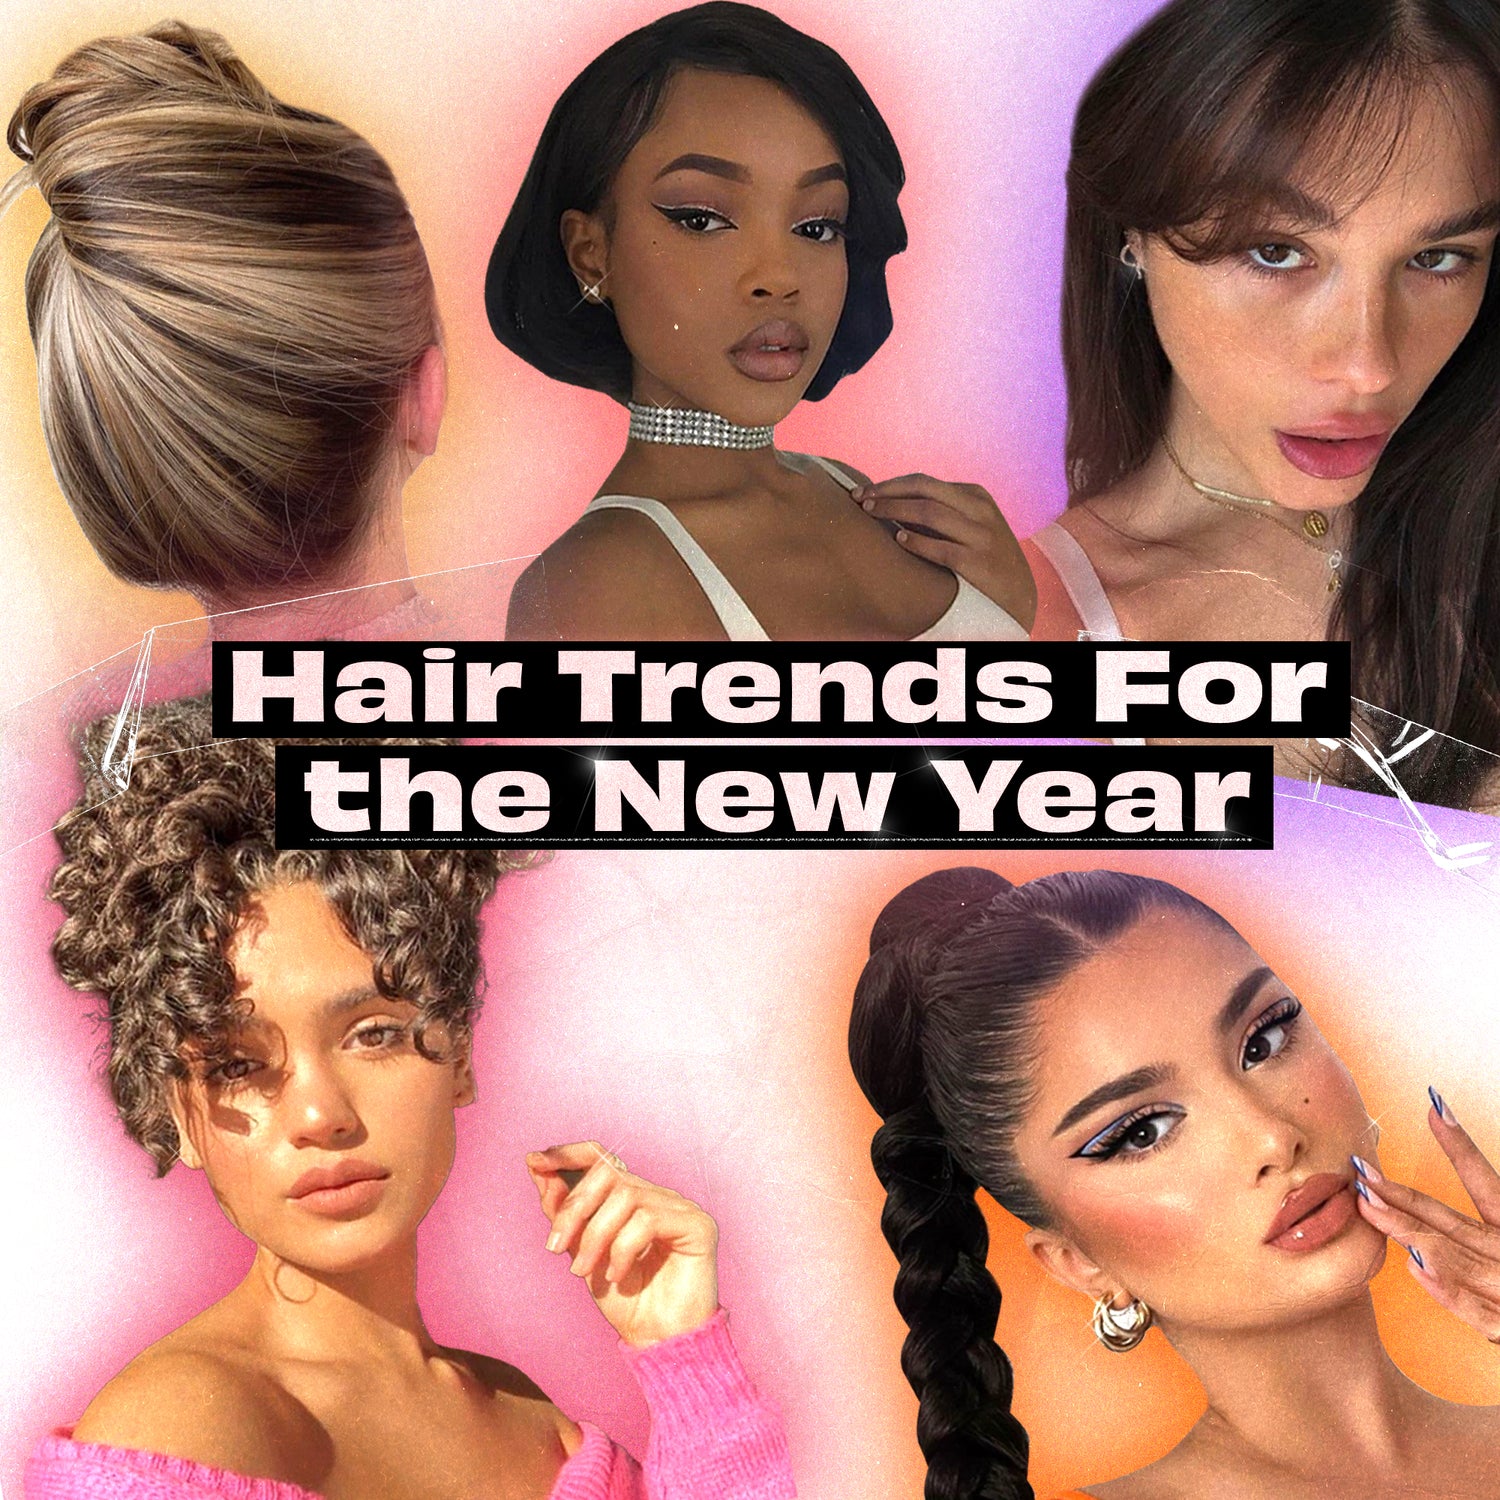 Hair Trends For The New Year featured image